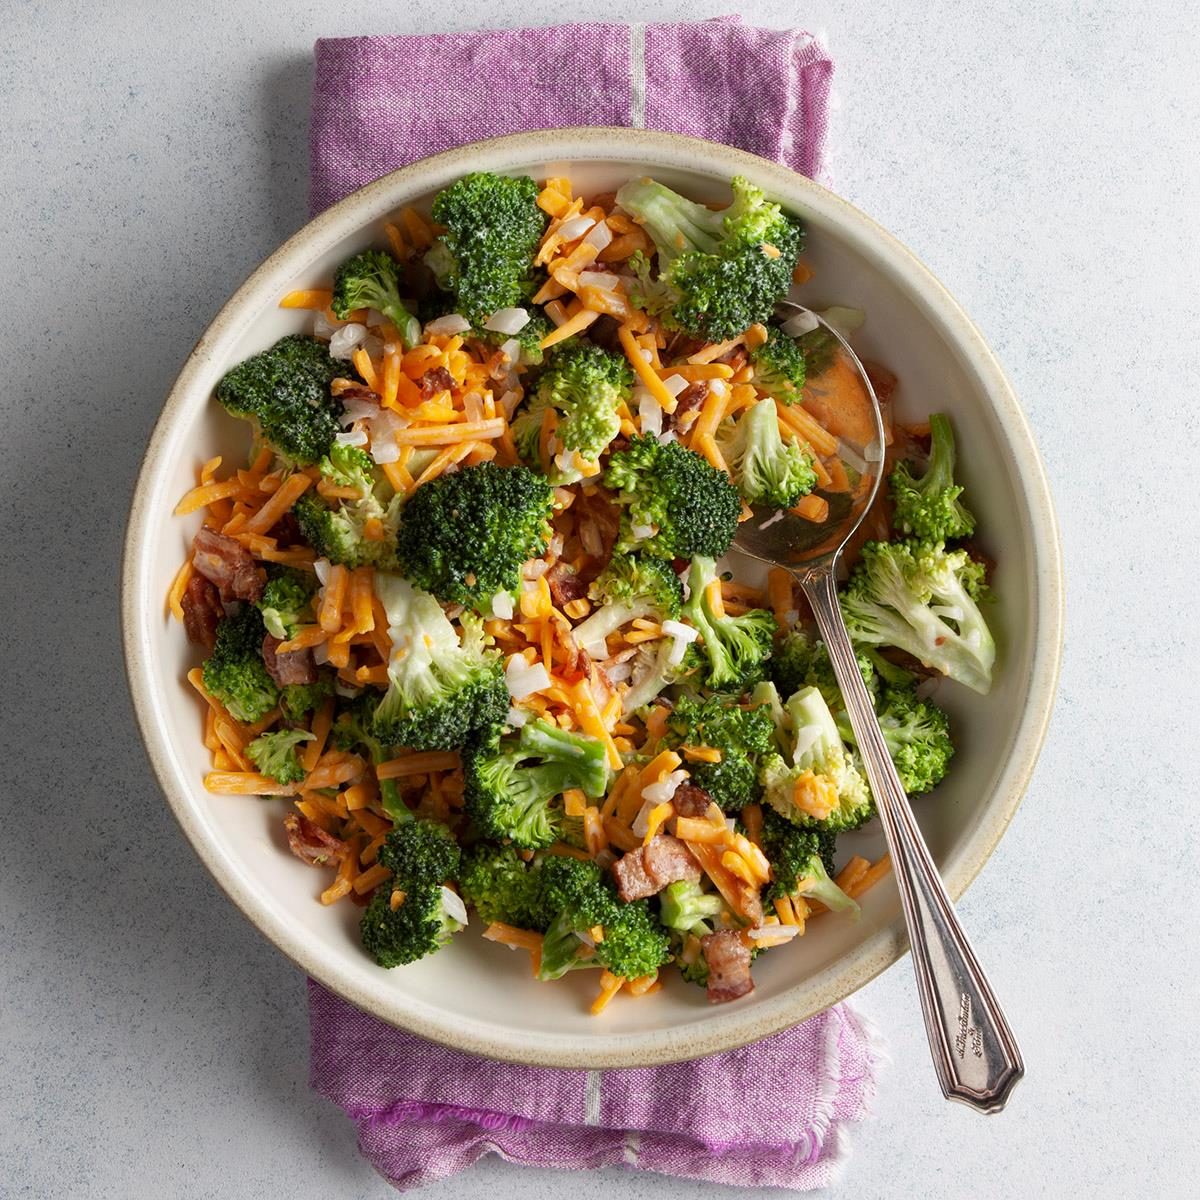 Easy Broccoli Salad Recipe: How to Make It | Taste of Home